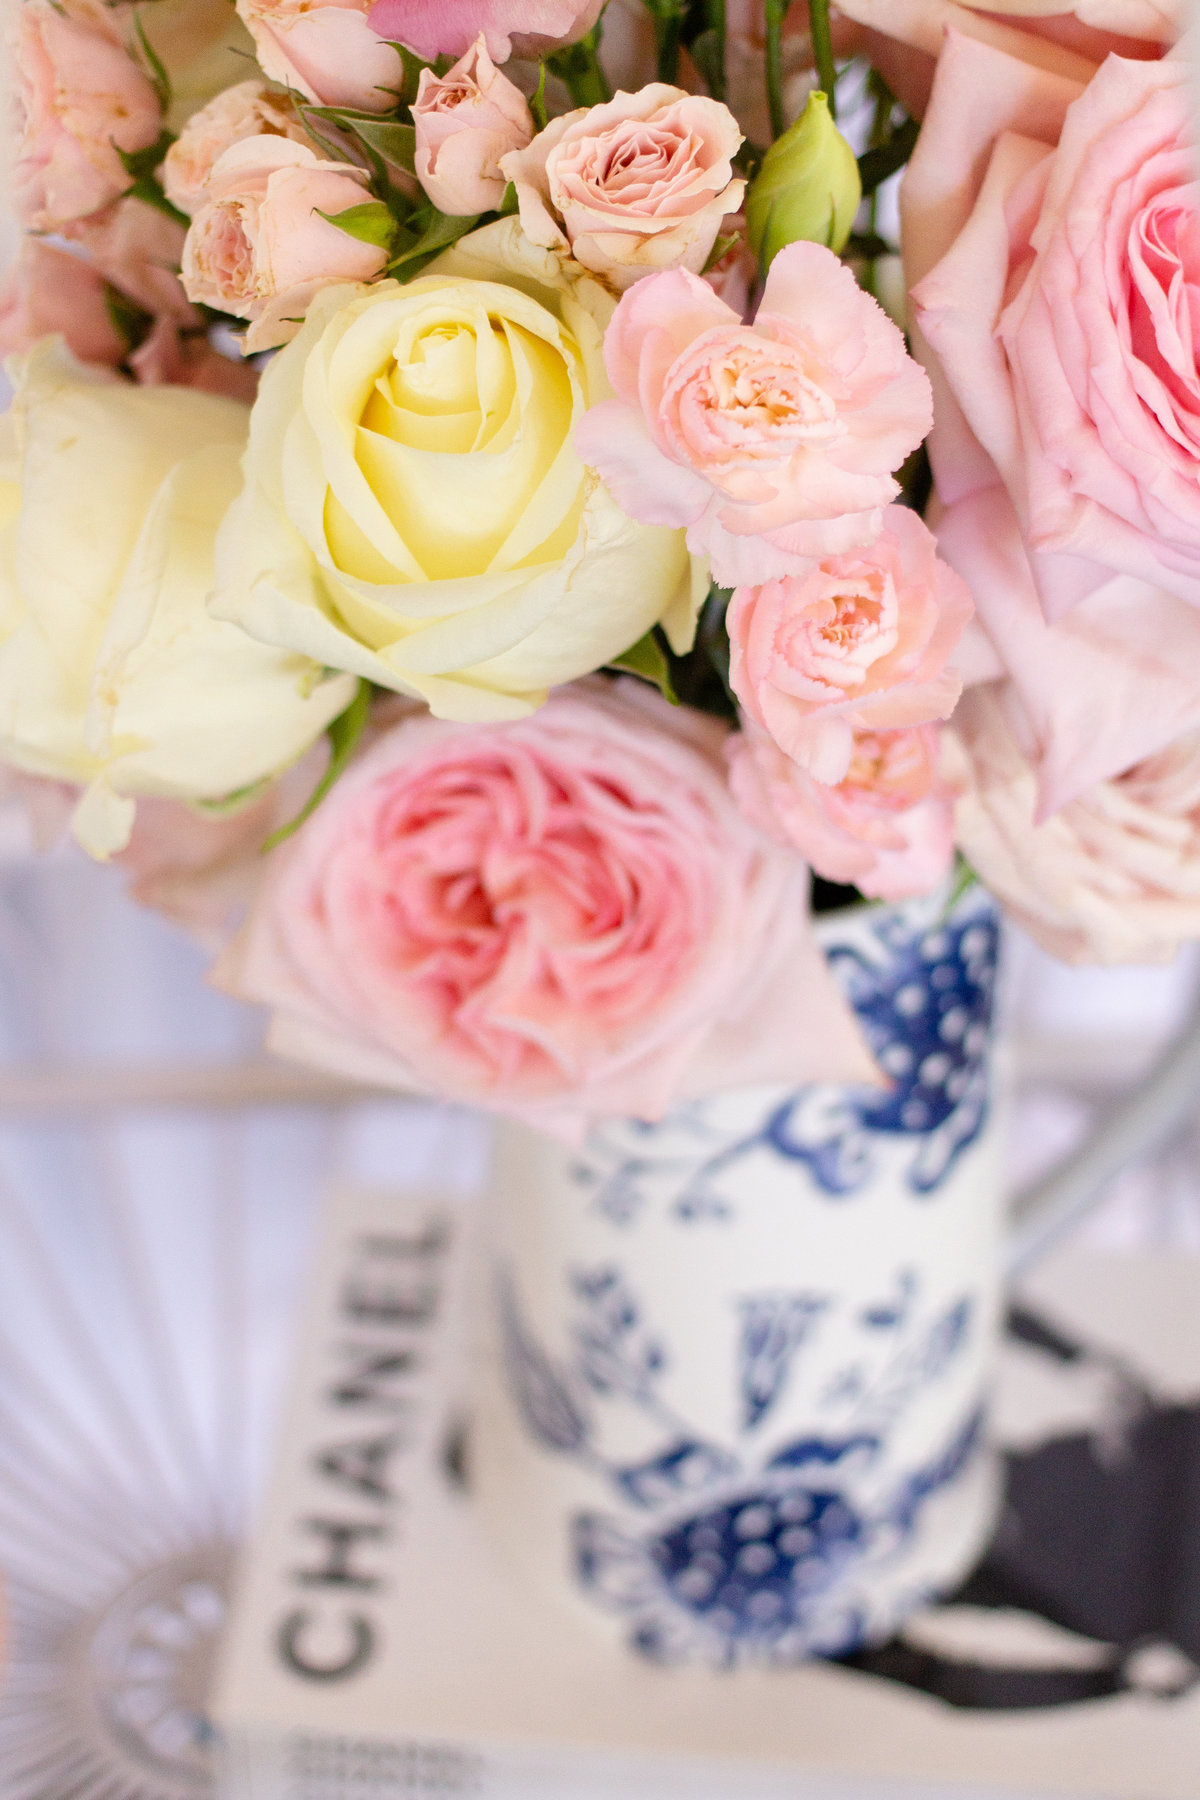 Pink and yellow wedding centerpiece bouquet in white and blue vase on top of Chanel magazine at wedding reception in Tampa, Florida